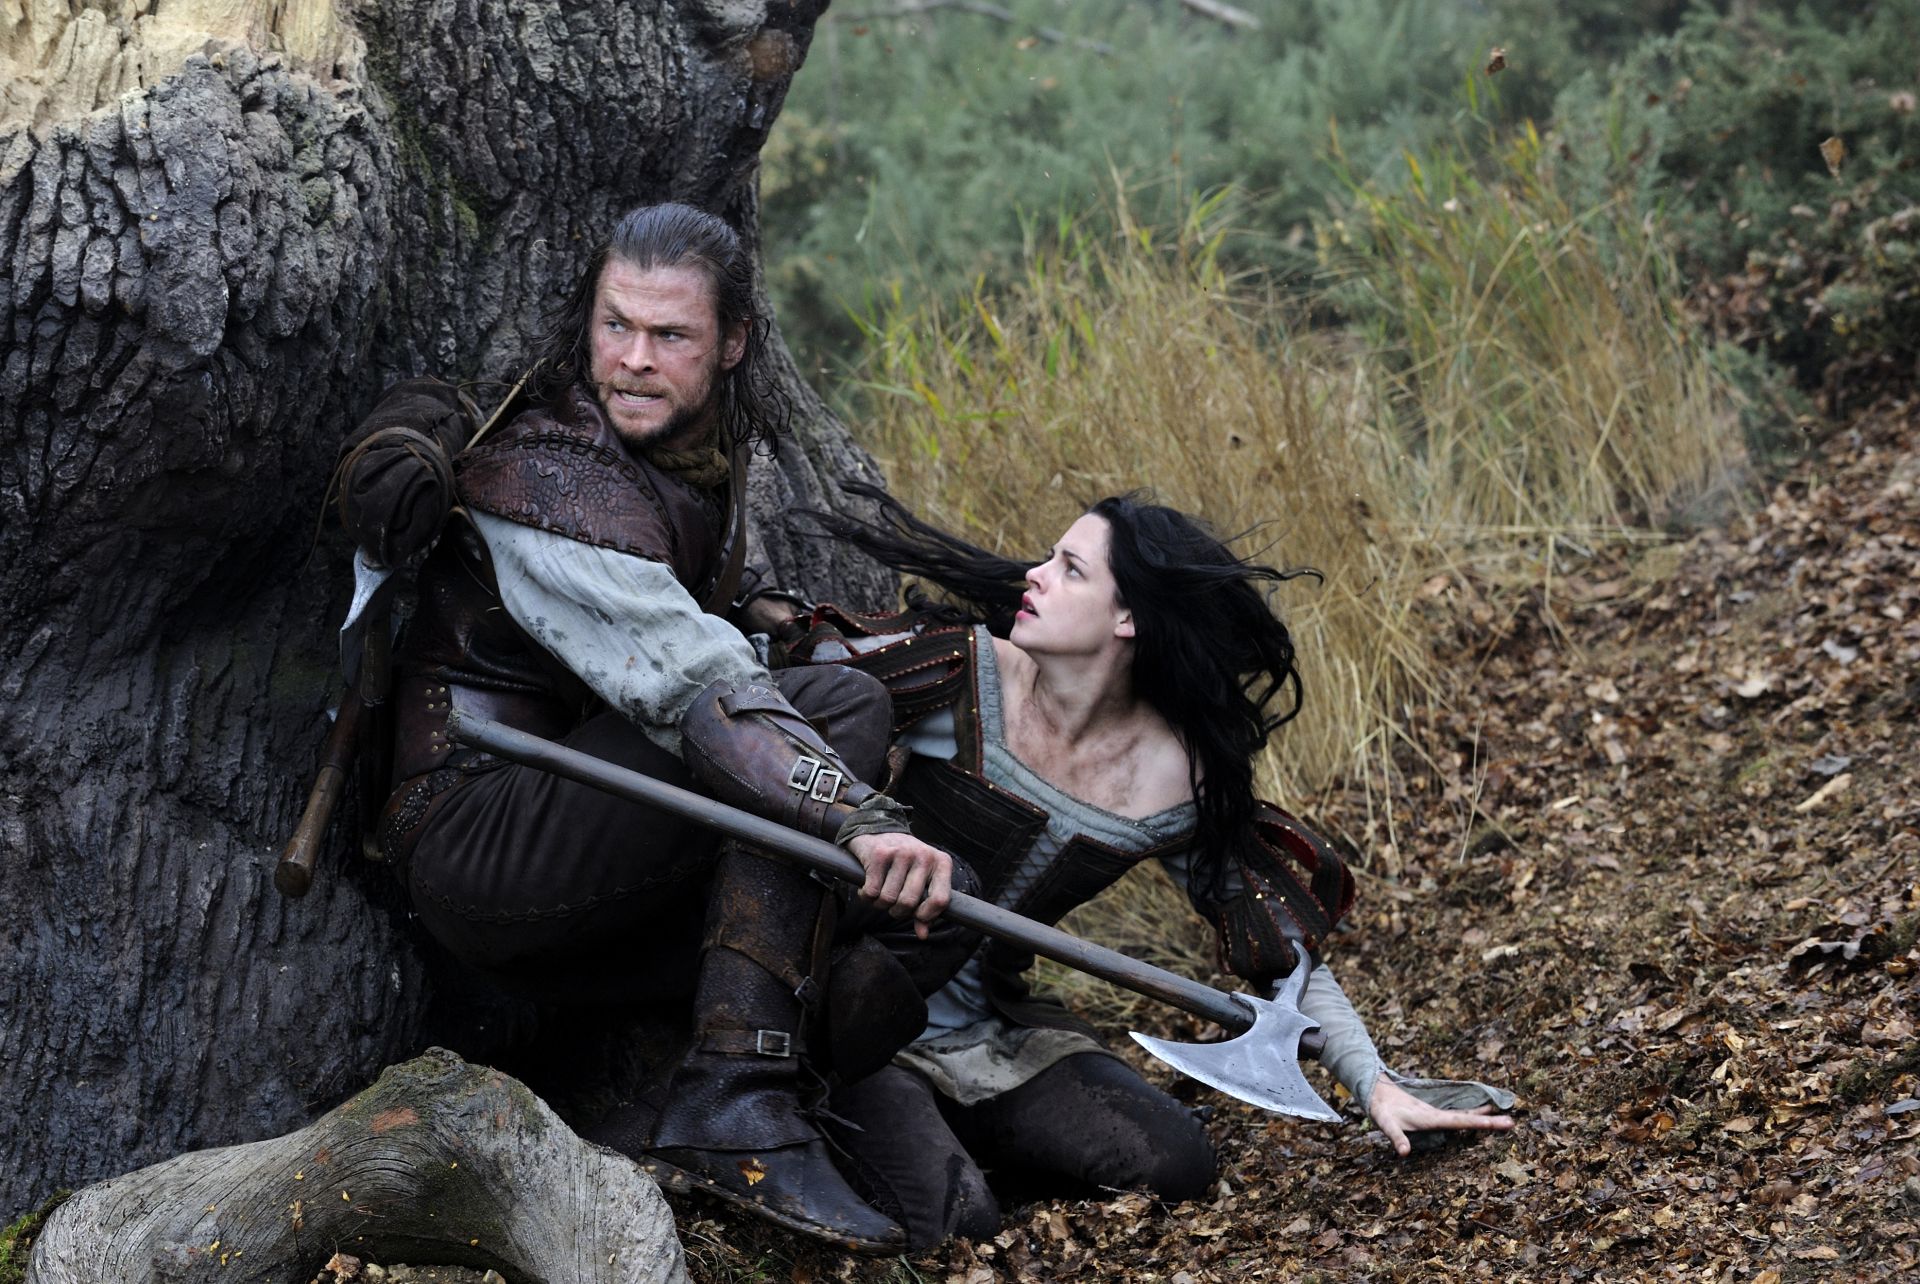 Movie Snow White And The Huntsman HD Wallpaper | Background Image